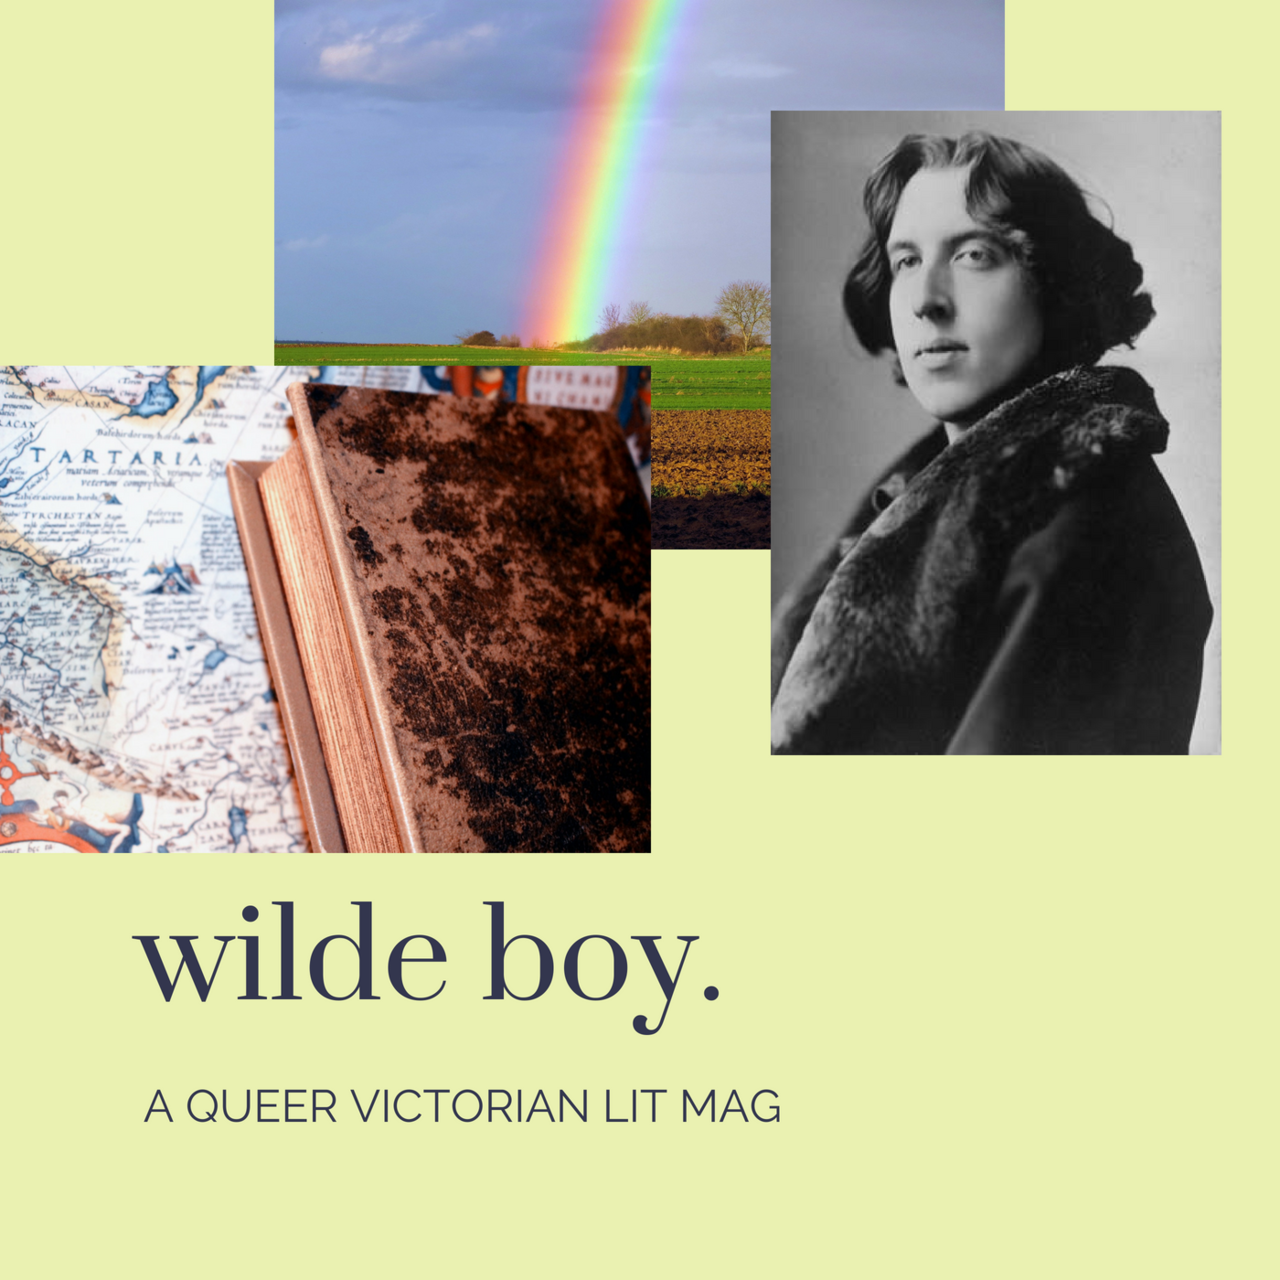 wilde boy is a brand new online literature magazine looking for pieces exploring intersections between the queer and the Victorianâand weâre looking for submissions for our first issue! Both visual art and the written word are welcome (along with any...